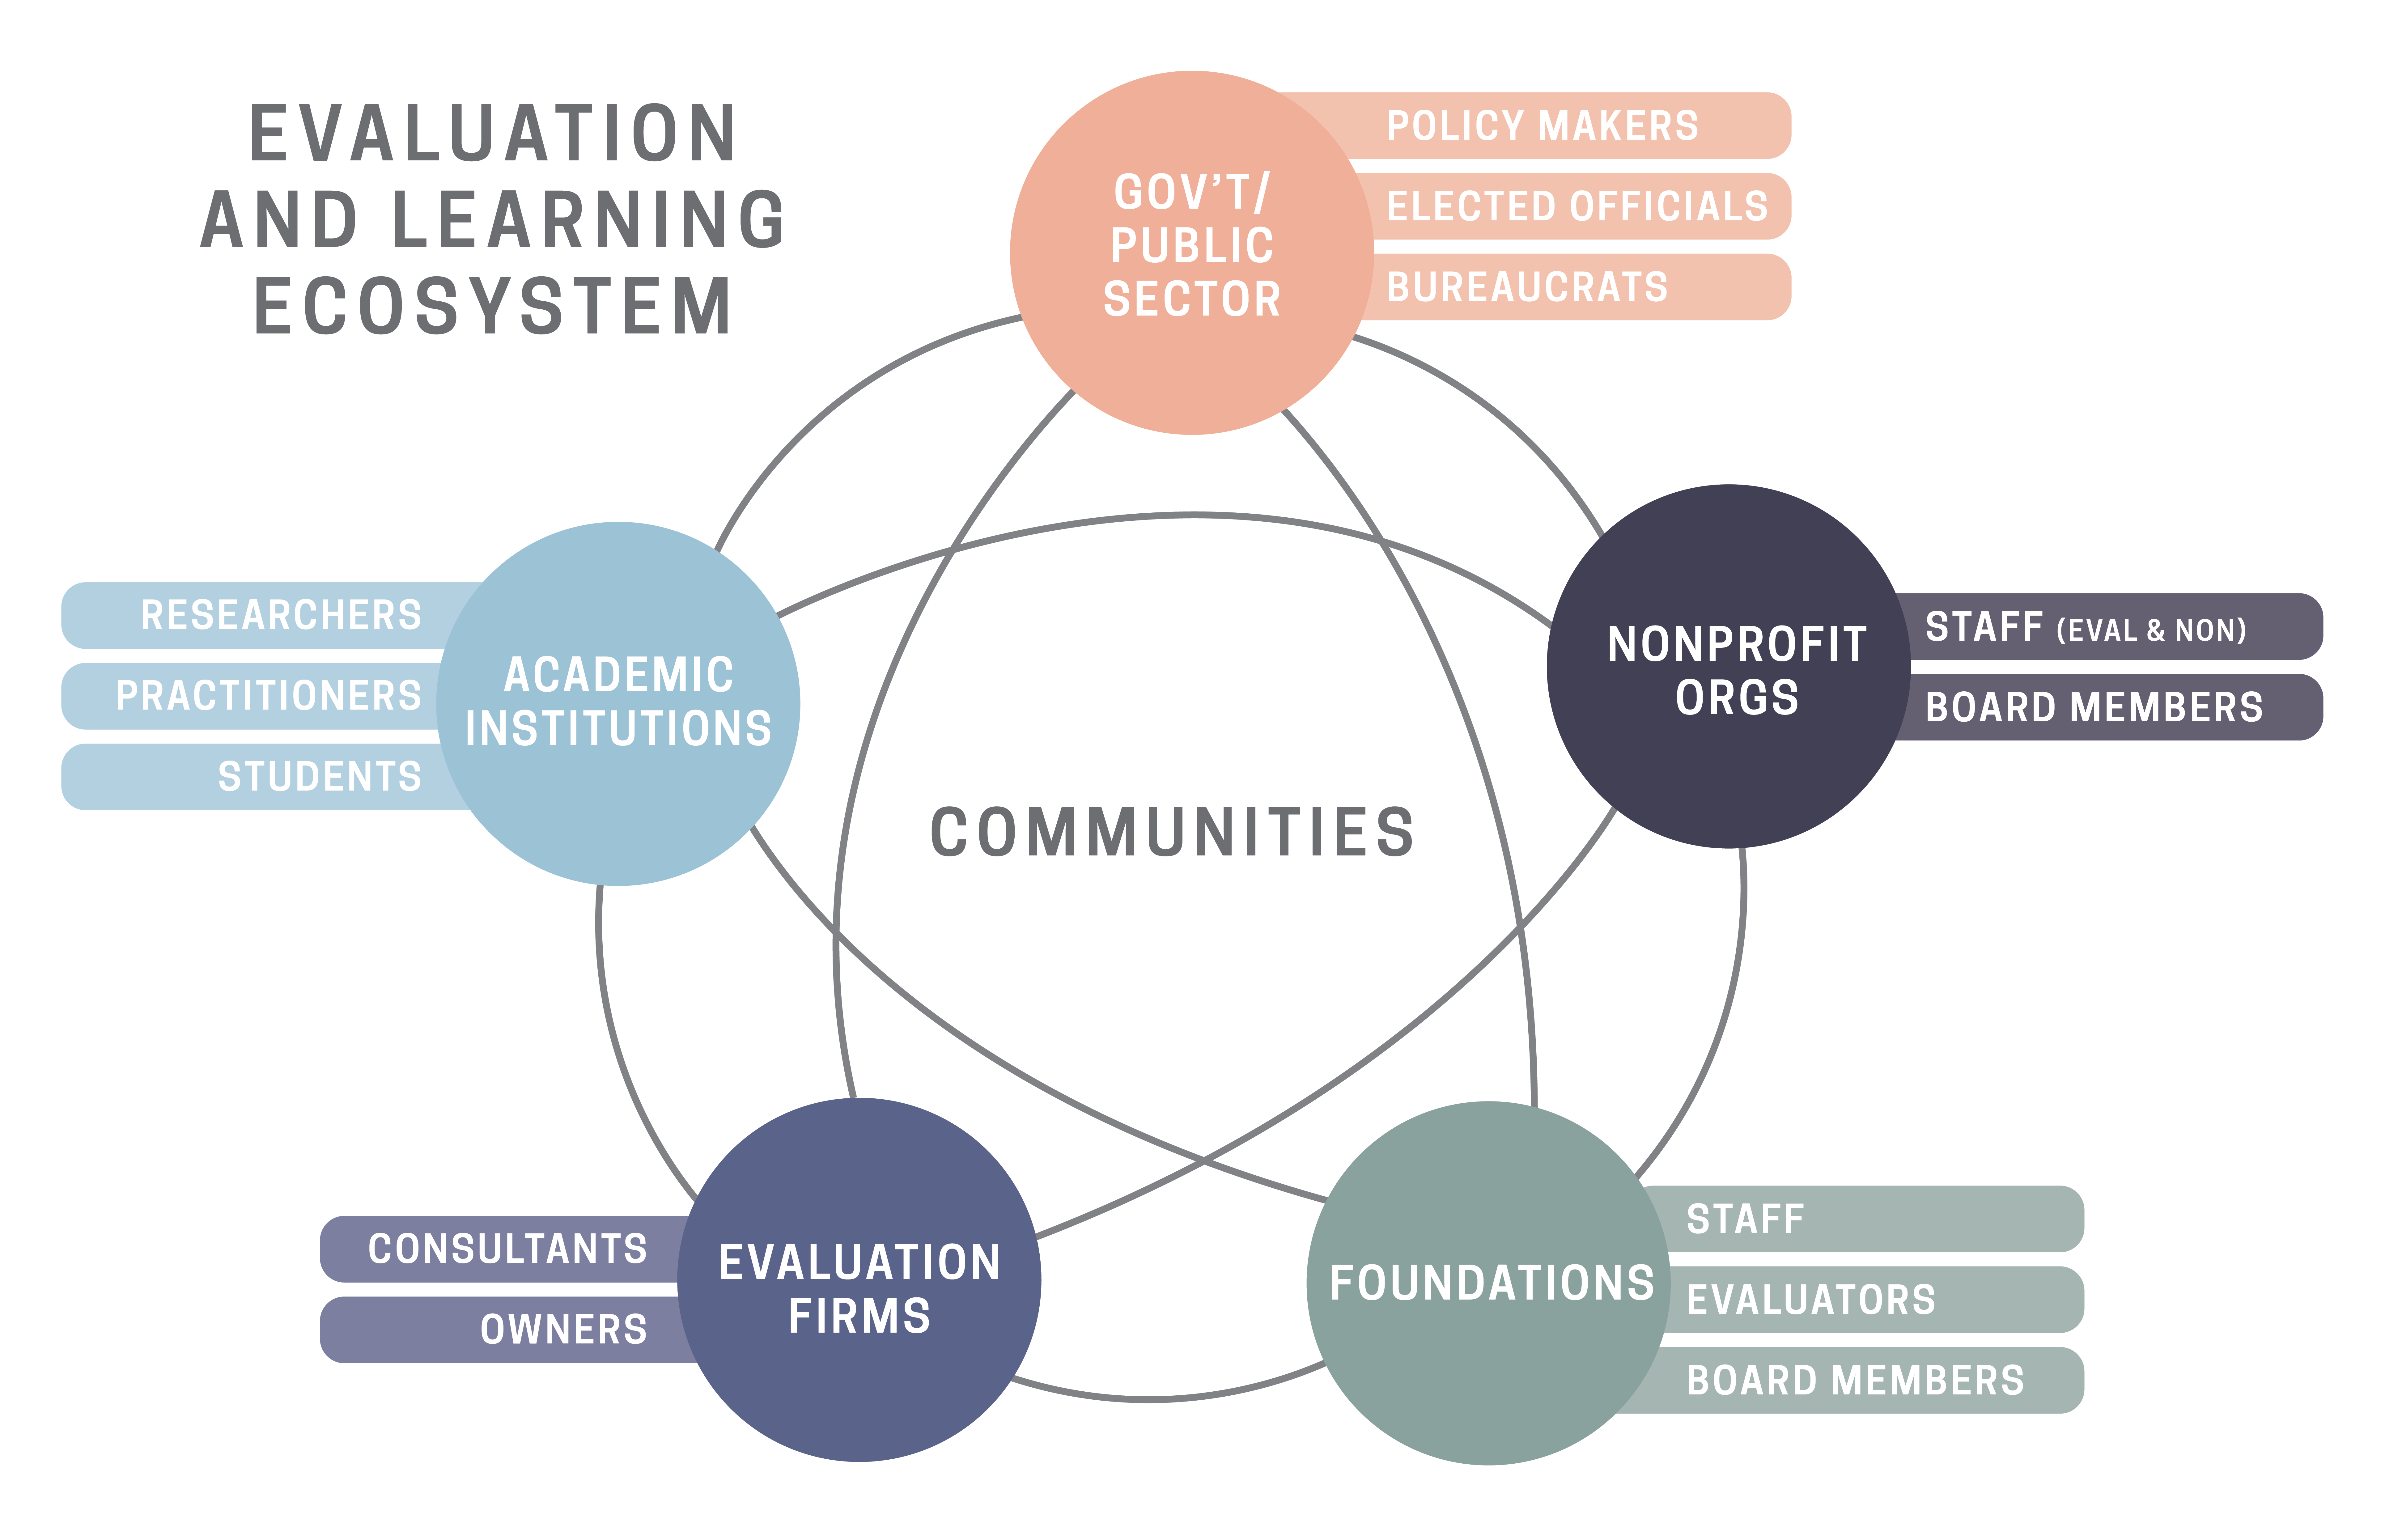 Evaluation and learning ecosystem diagram